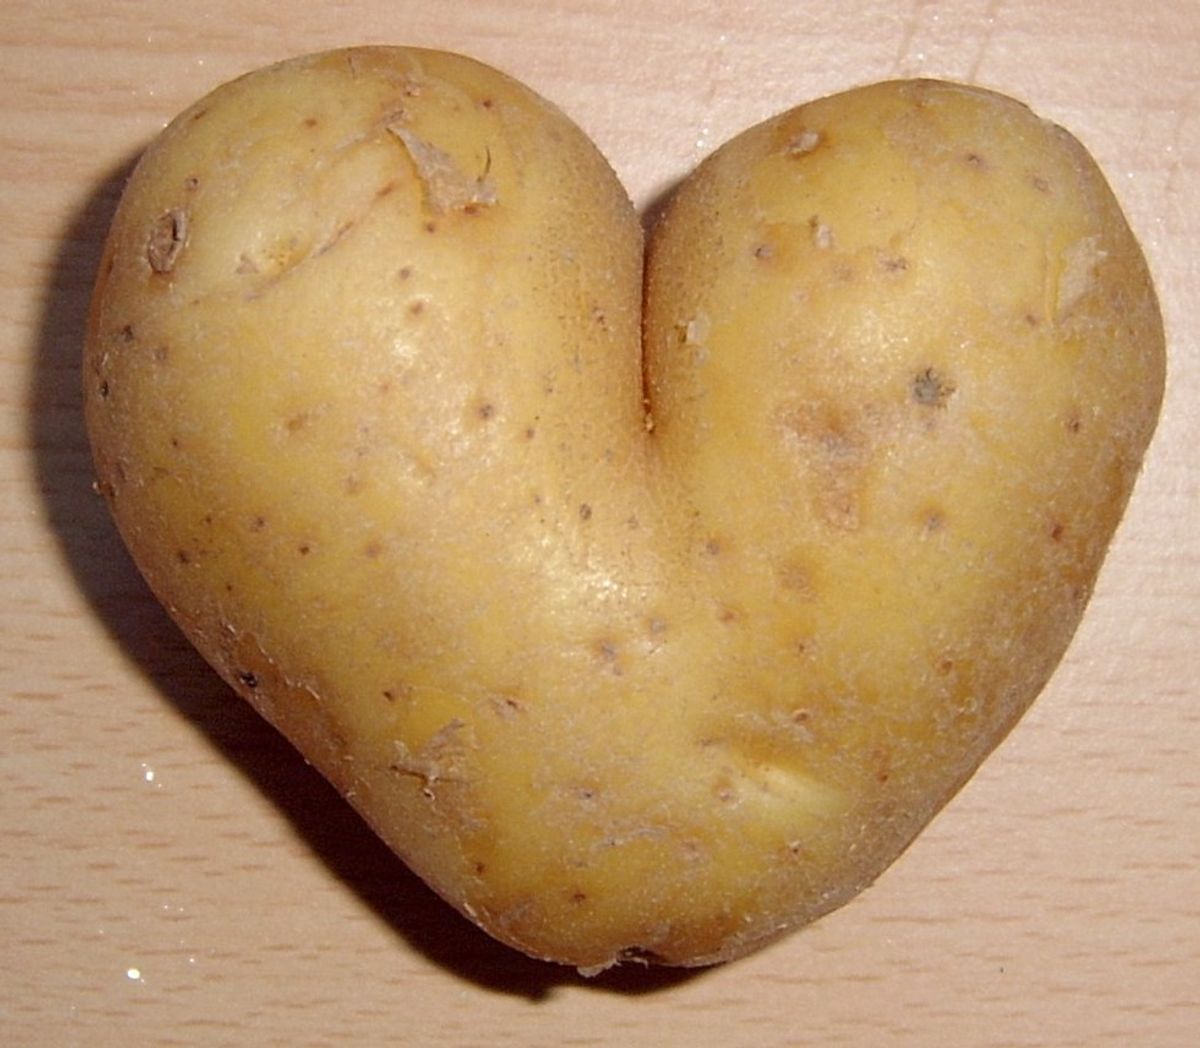 10 Reasons Why Potatoes Are Better Than Most People